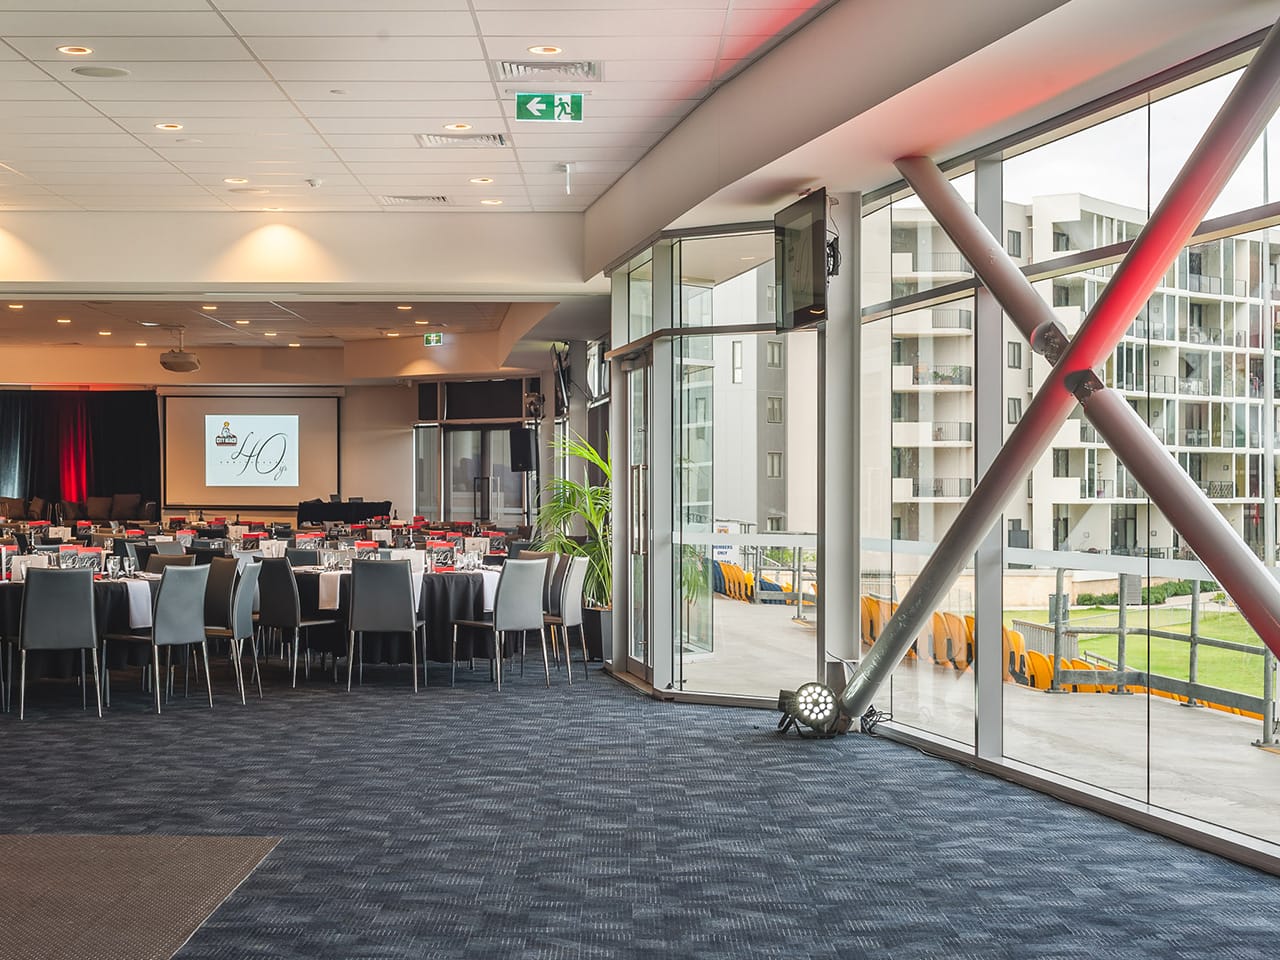 Inside The Function Room With Chairs And Tables In Banquet Style, Projection Screen And Outside View On The Right Side